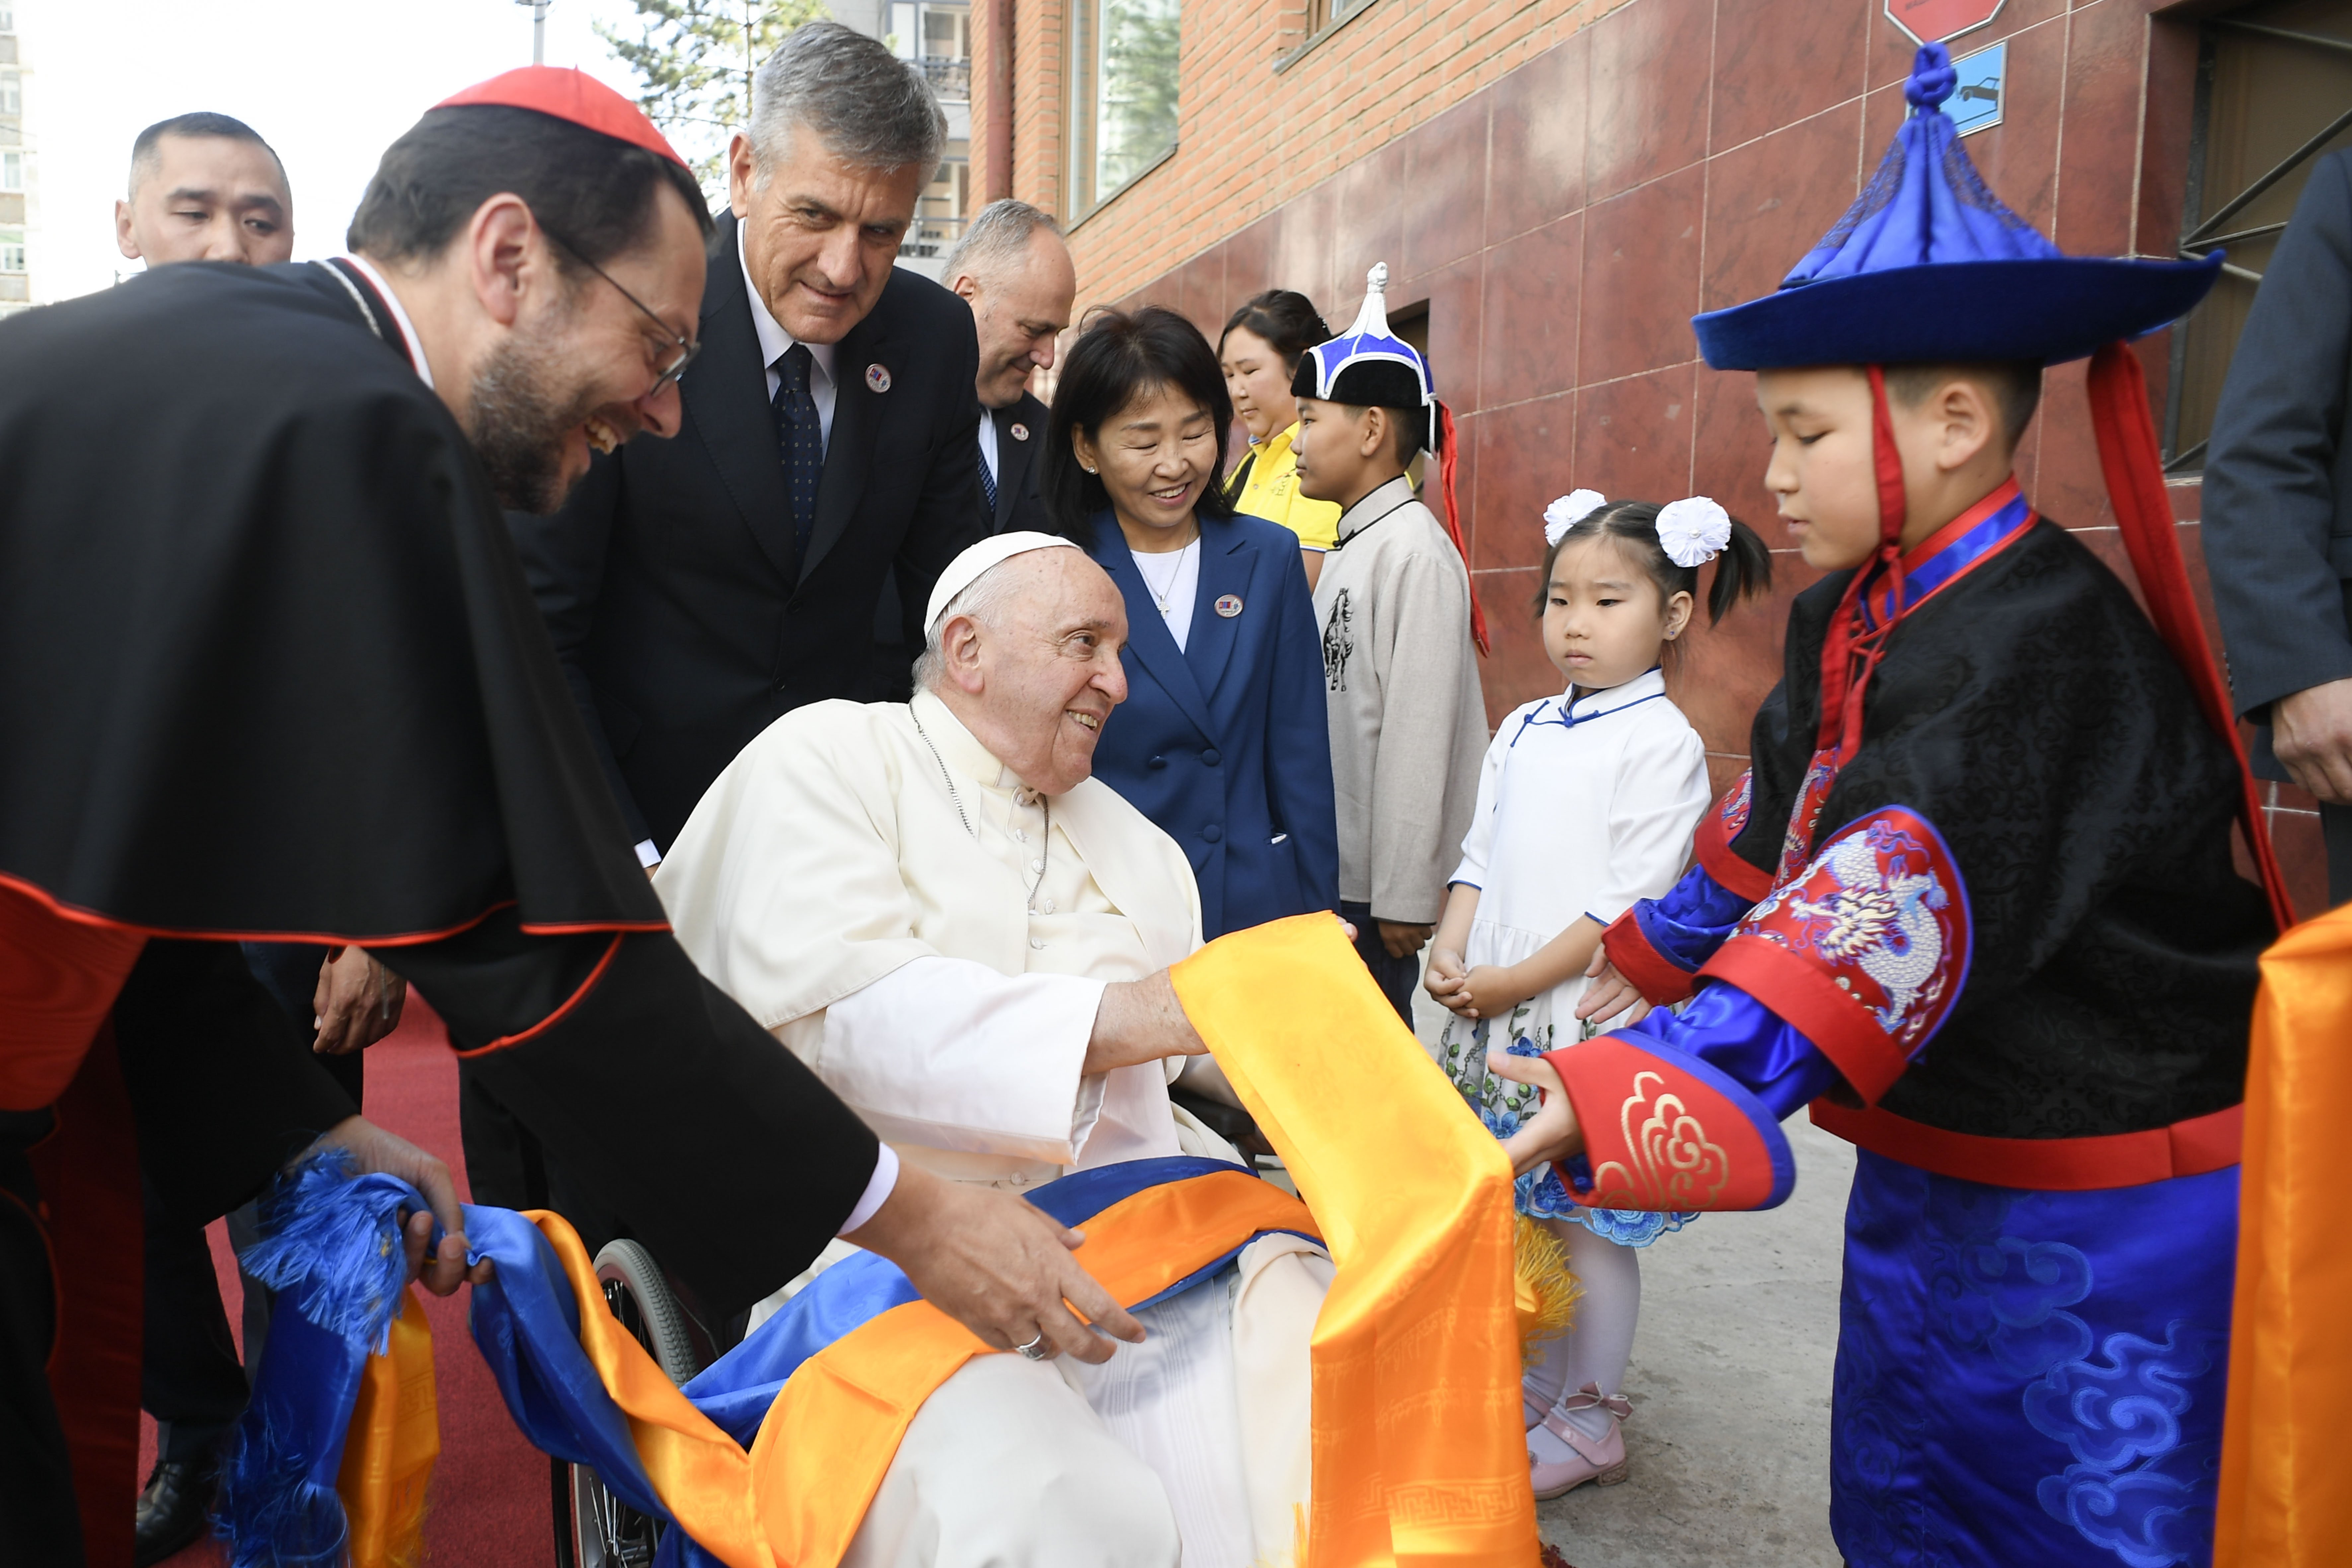 A boy gives Pope Francis scarves as he arrives at the headquarters of the Apostolic Prefecture of Ulaanbaatar, Mongolia, Sept. 1, 2023. Cardinal Giorgio Marengo, the prefect, will host the pope at the prefecture during his four-day visit to the country. (CNS photo/Vatican Media)